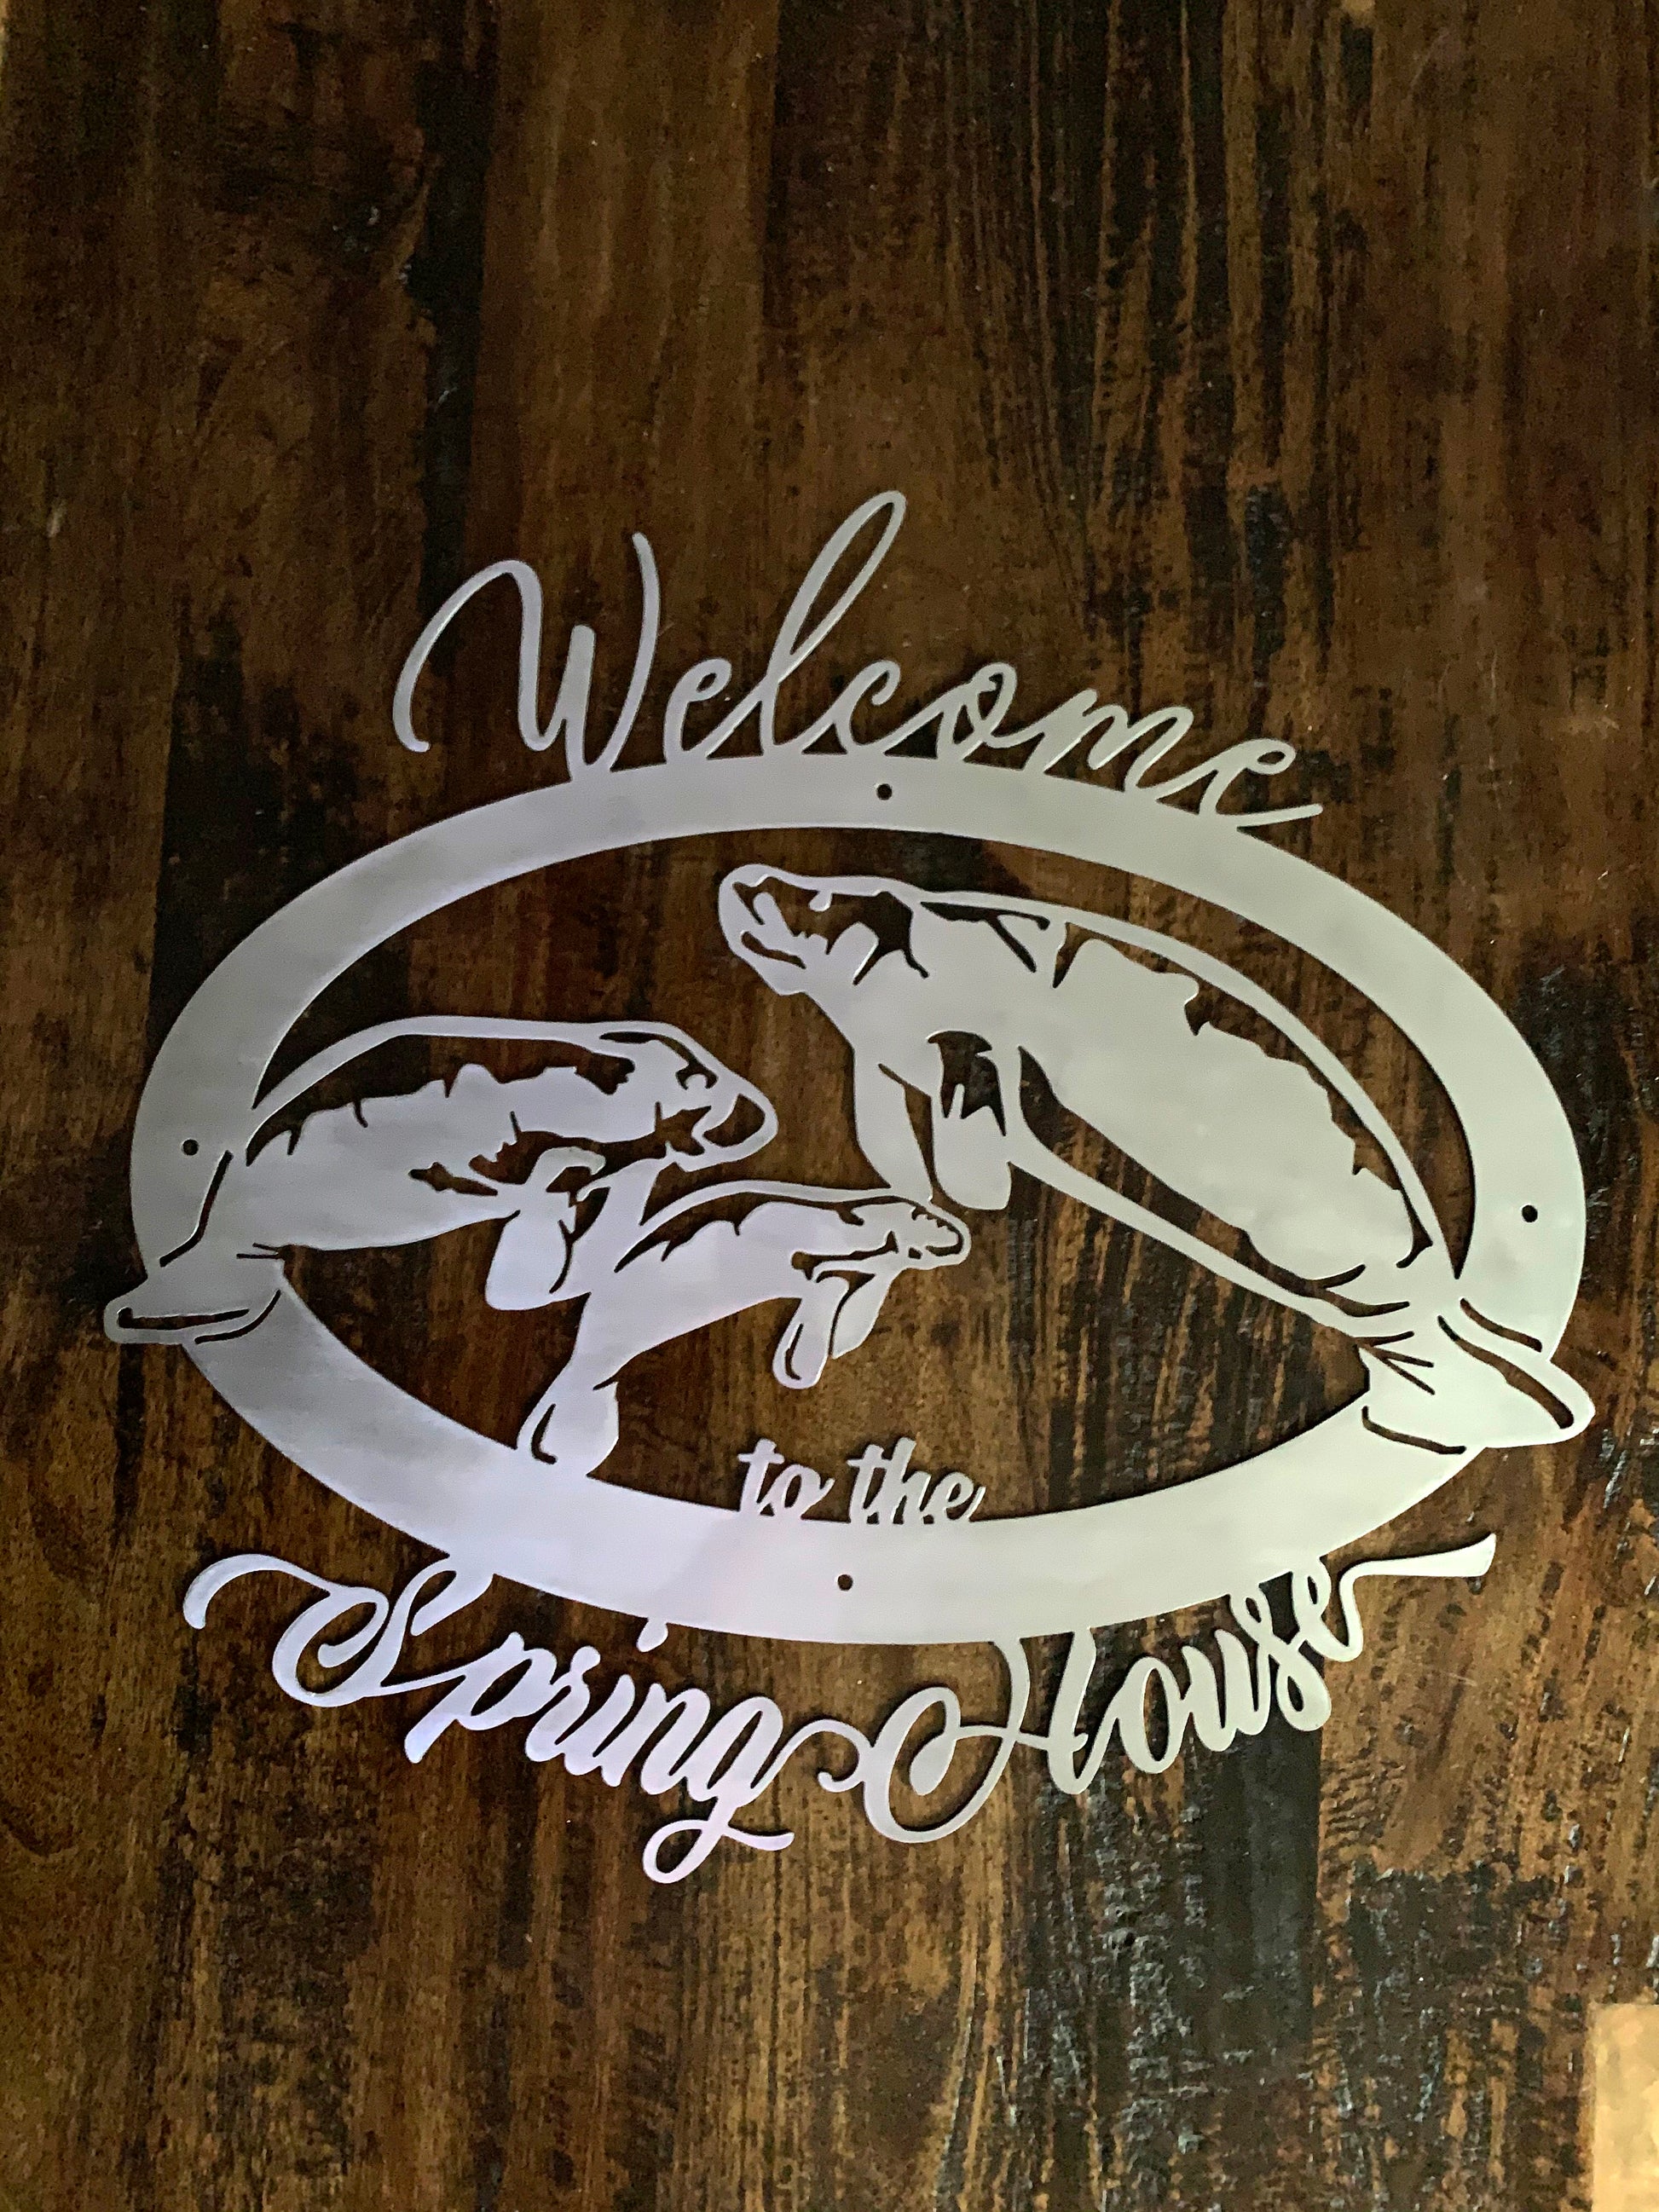 3 manatee sign in brushed metal over dark wood background